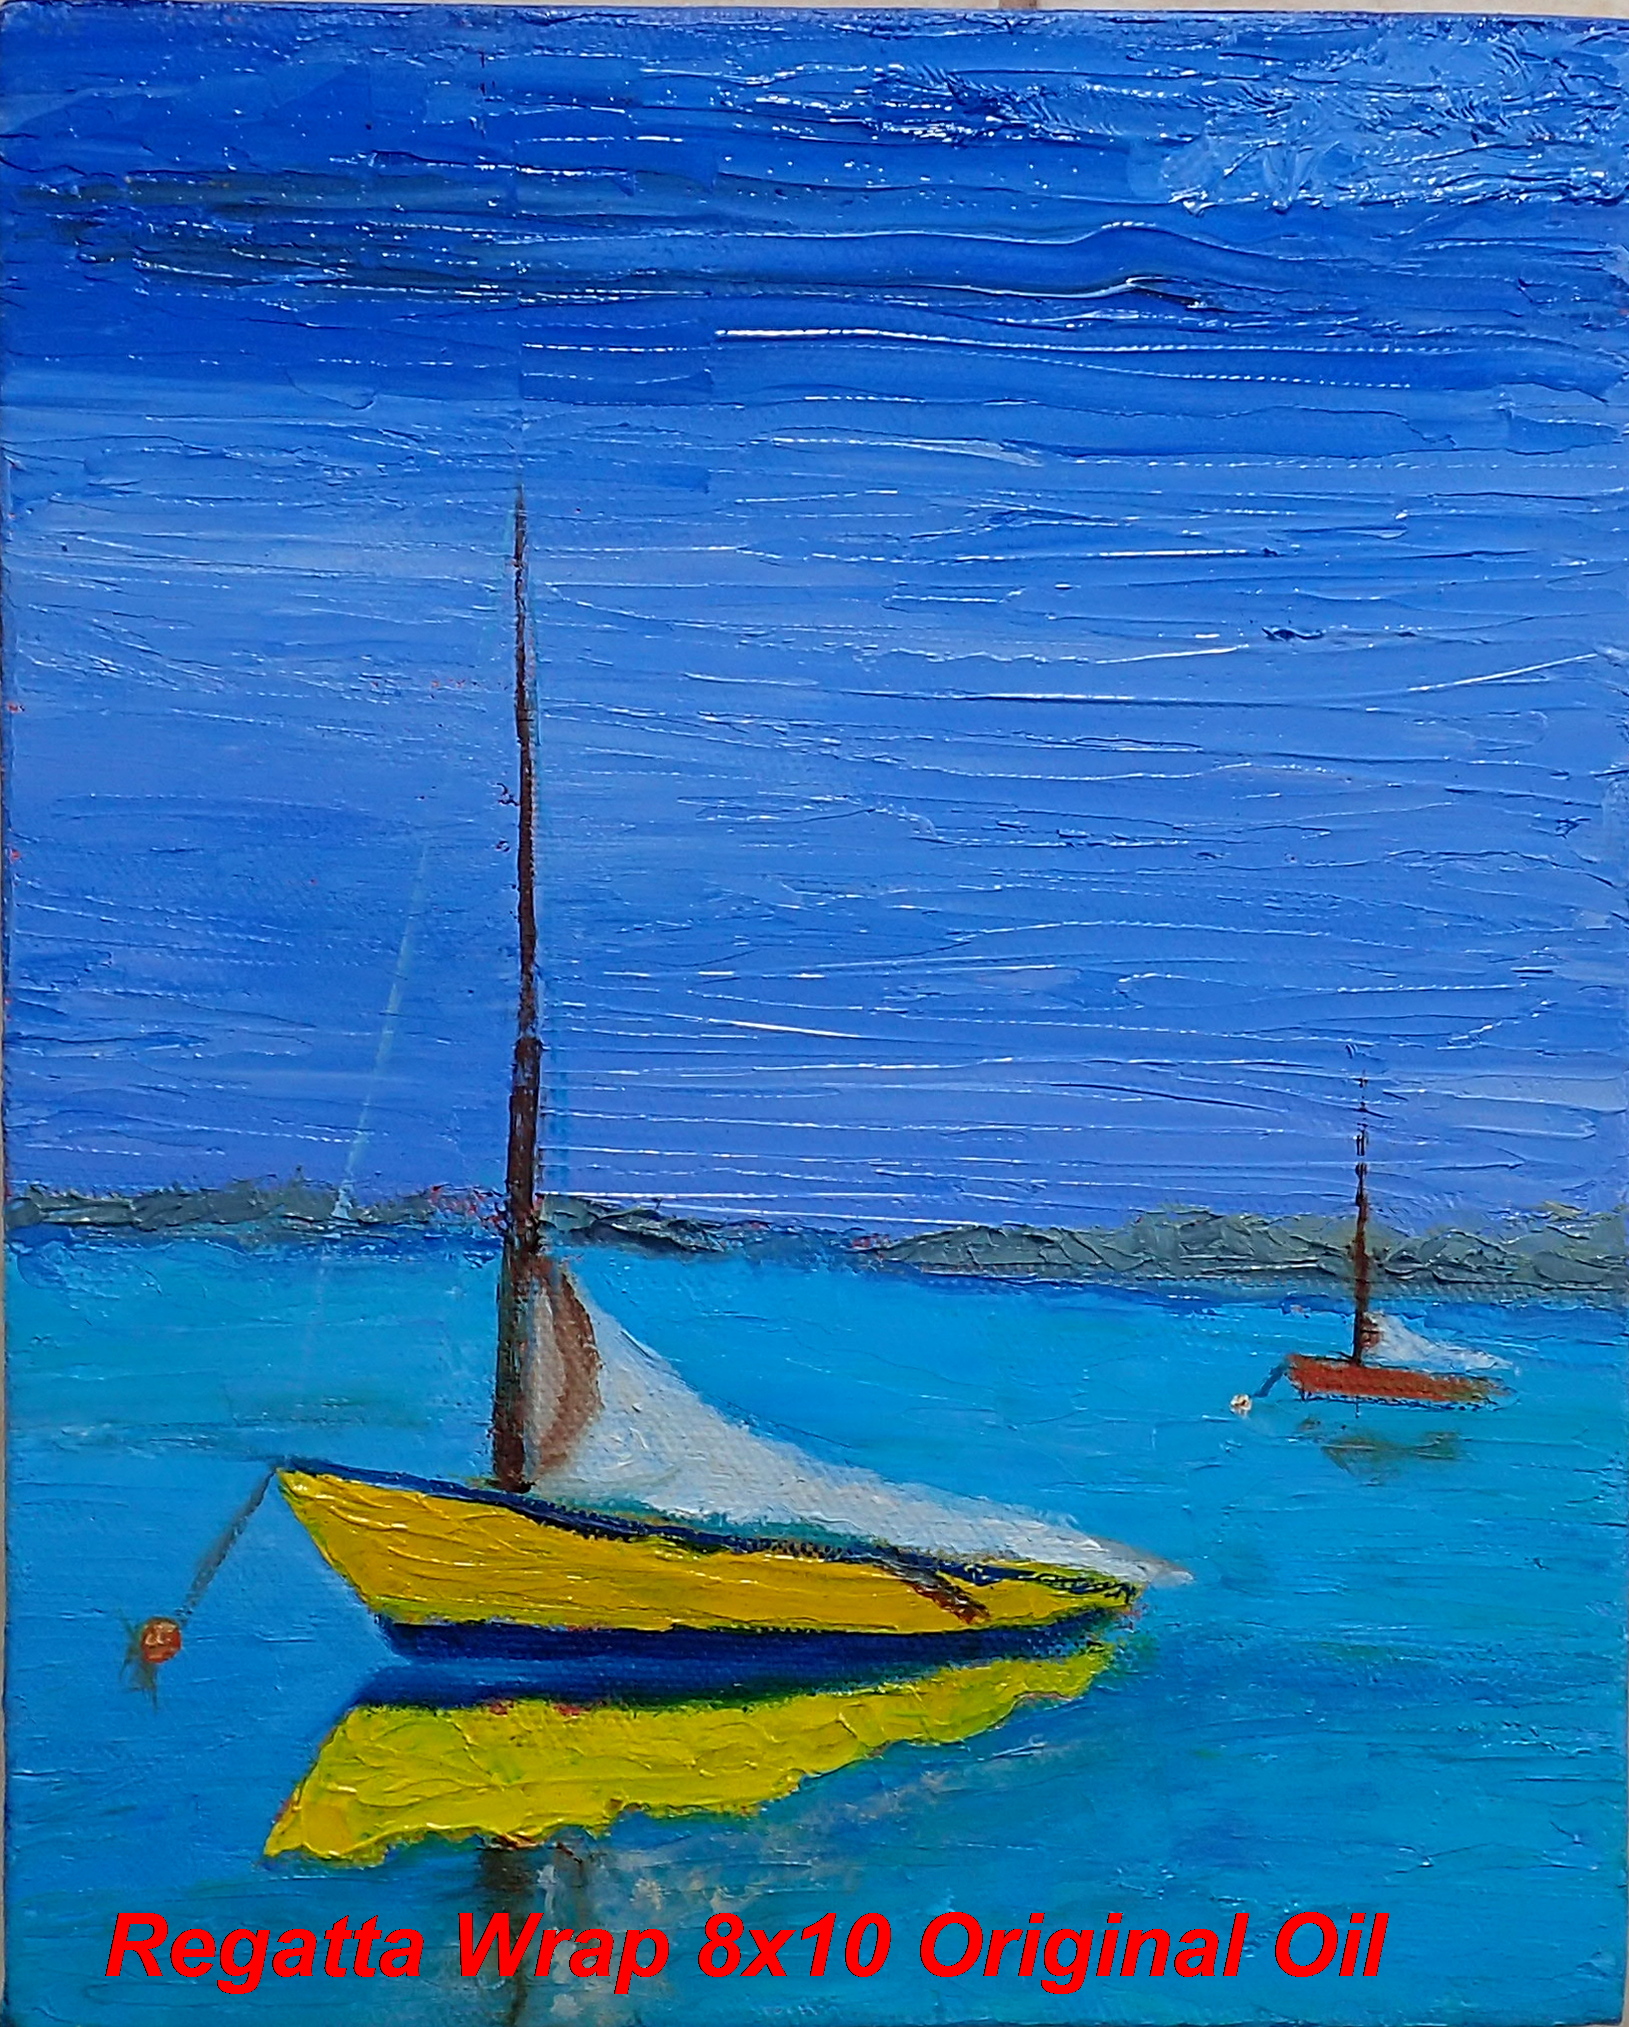 	Original Oil Painting on cradled canvas 8x10" The annual Bahamian sloop Regatta in Georgetown brings all the islands together to celebrate the tradition of Bahamian sloops once solely workboats for f